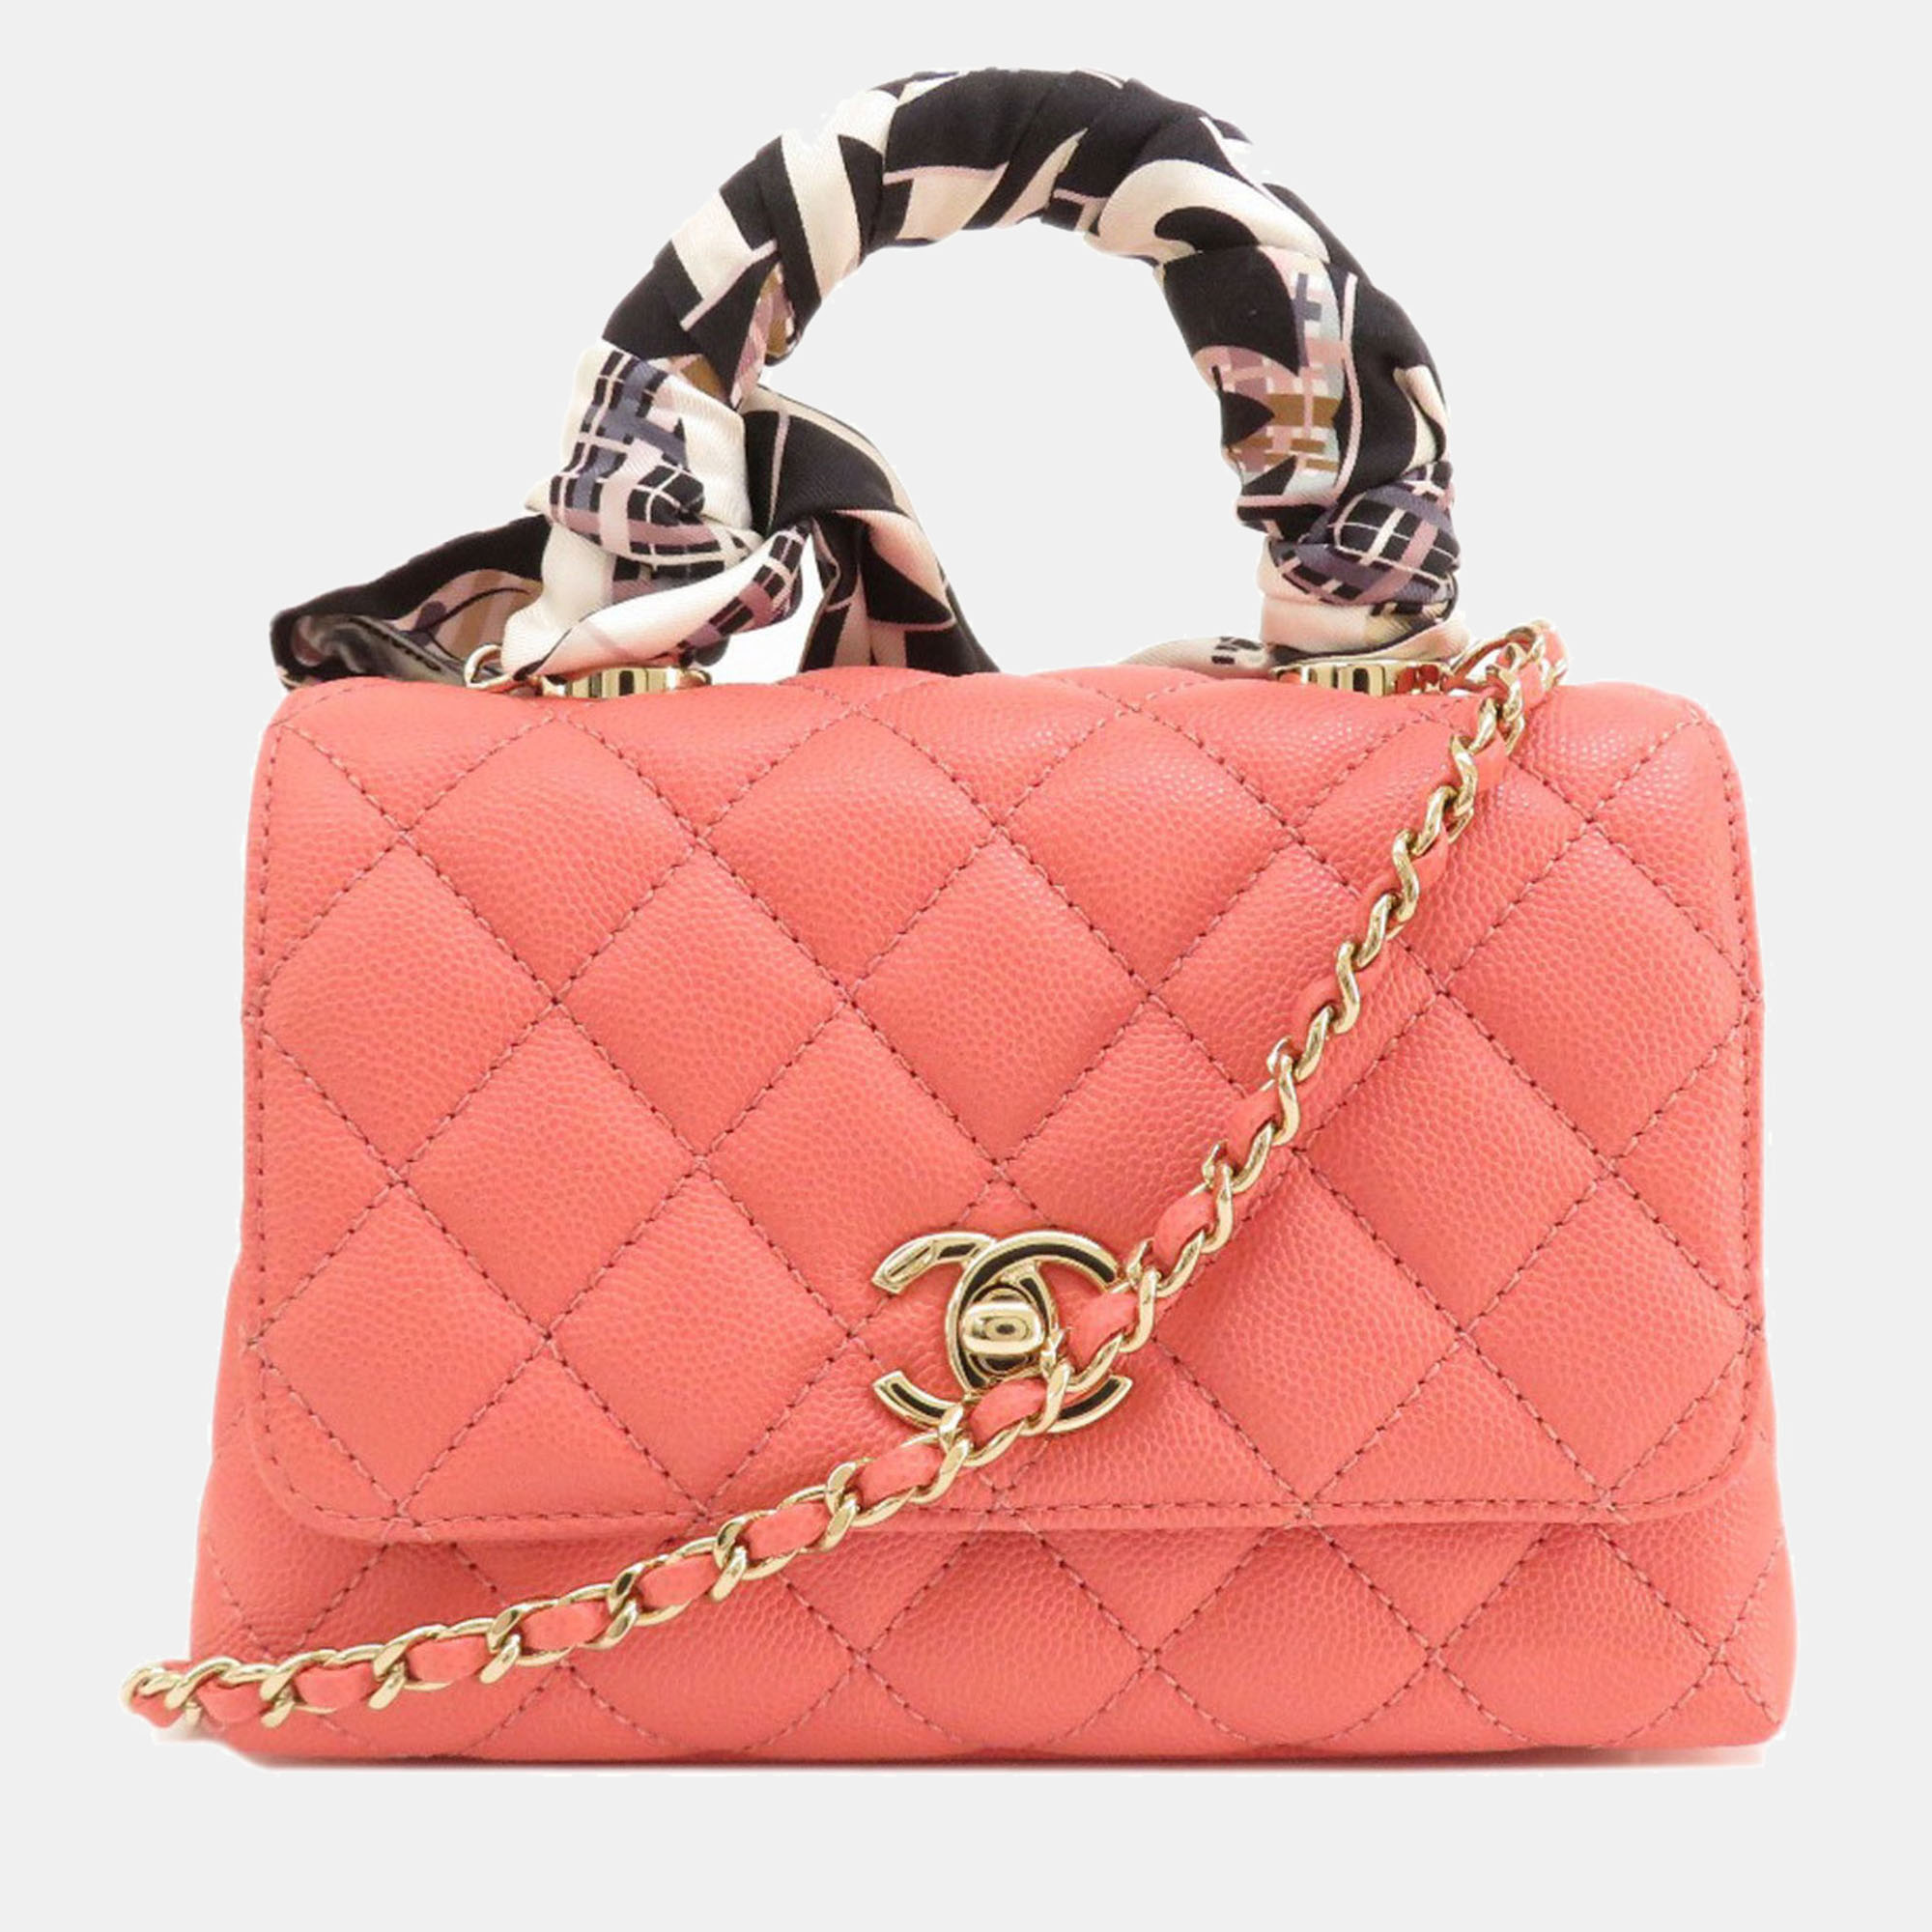 Chanel pink leather caviar twilly coco top handle bag